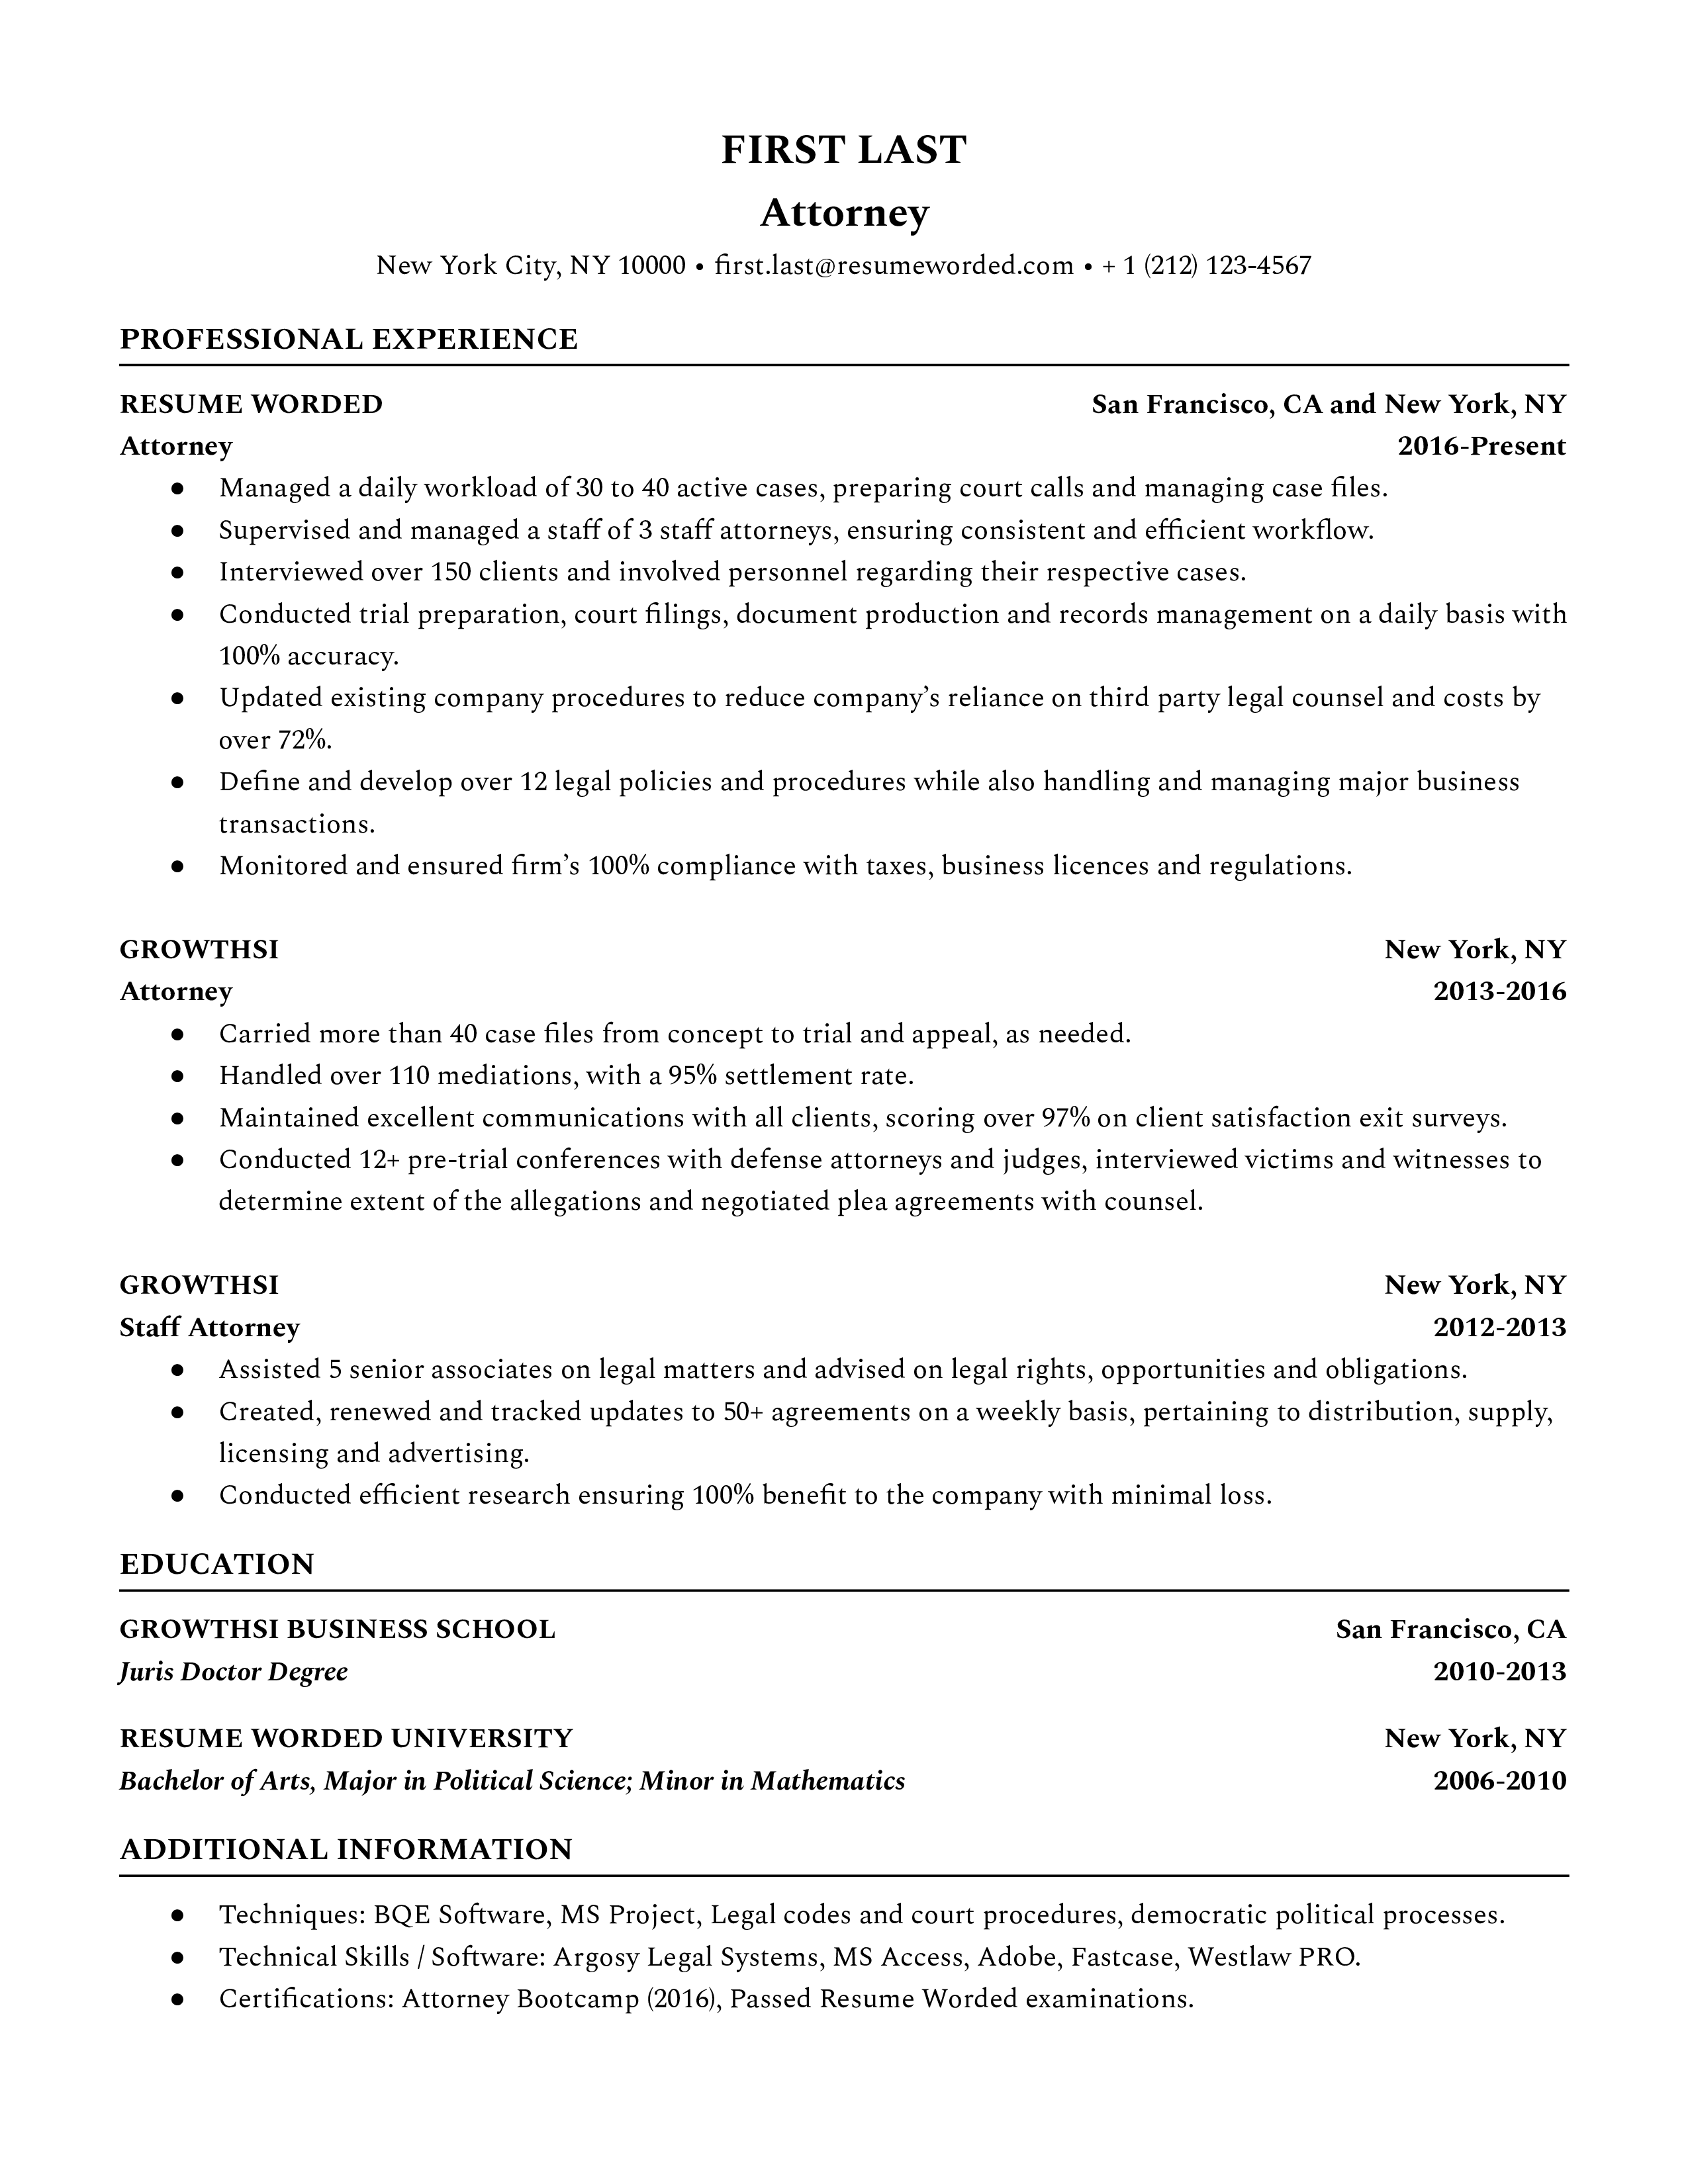 A detailed CV for an attorney showcasing specializations and advocacy skills.